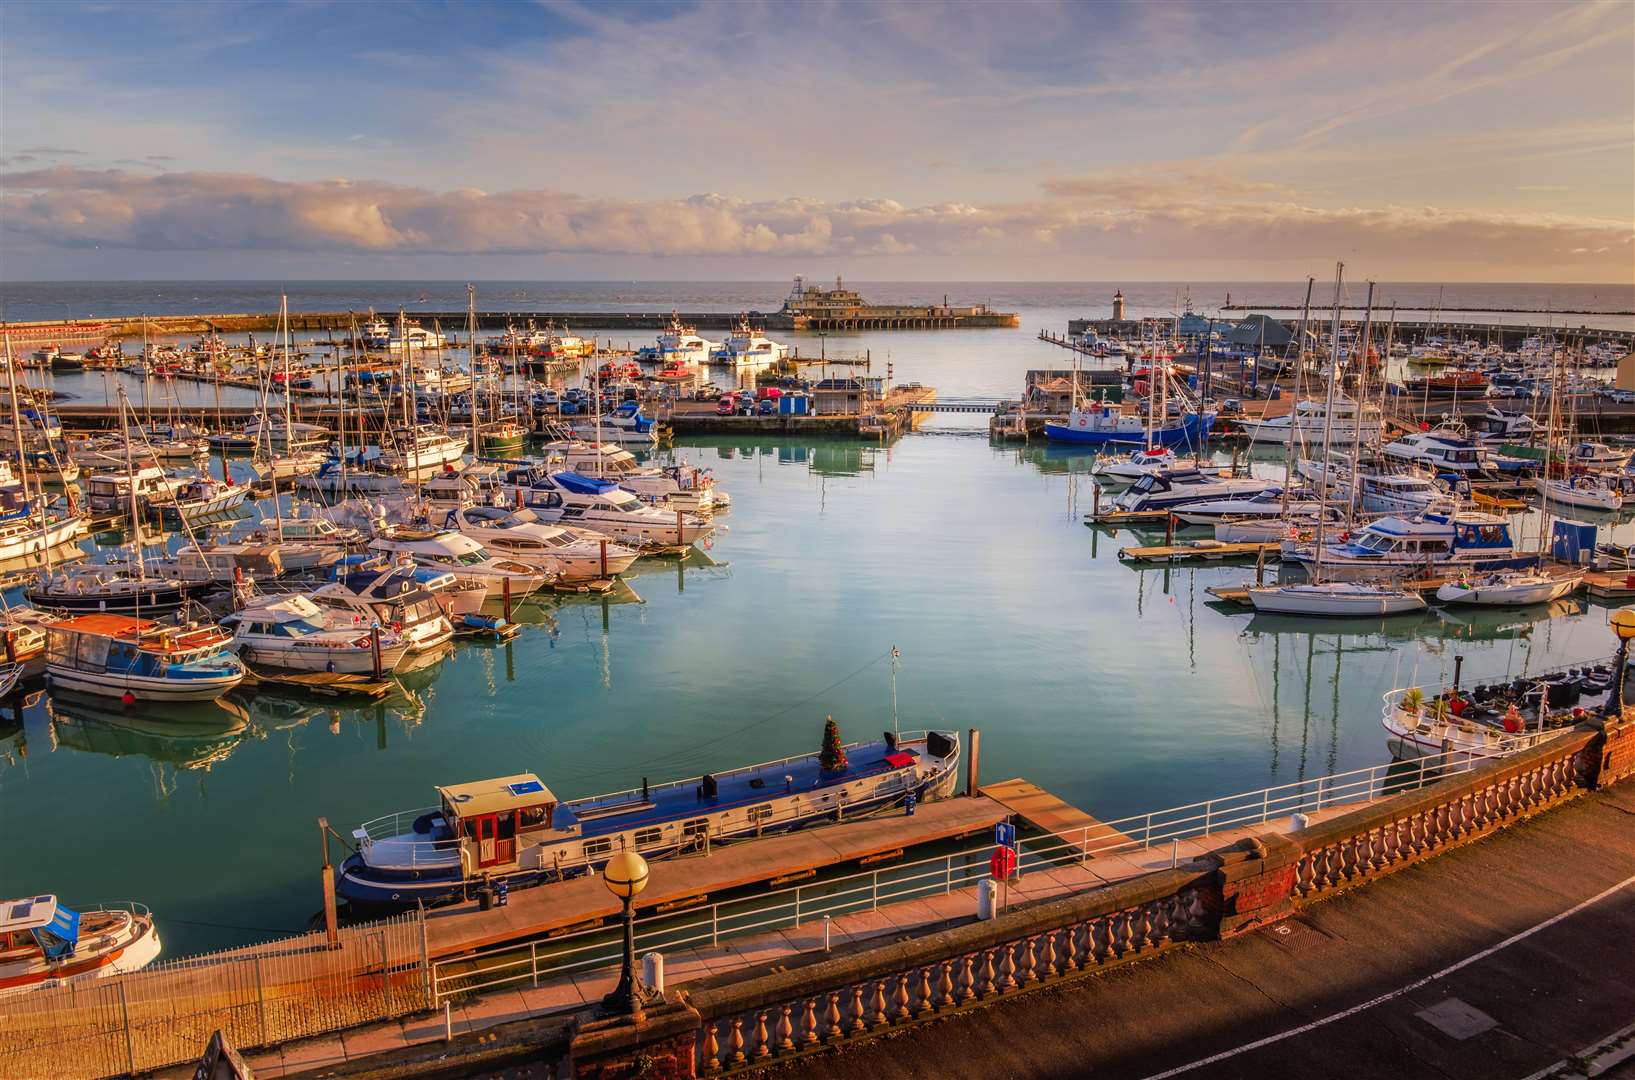 Ramsgate's Royal Harbour is a big draw for visitors